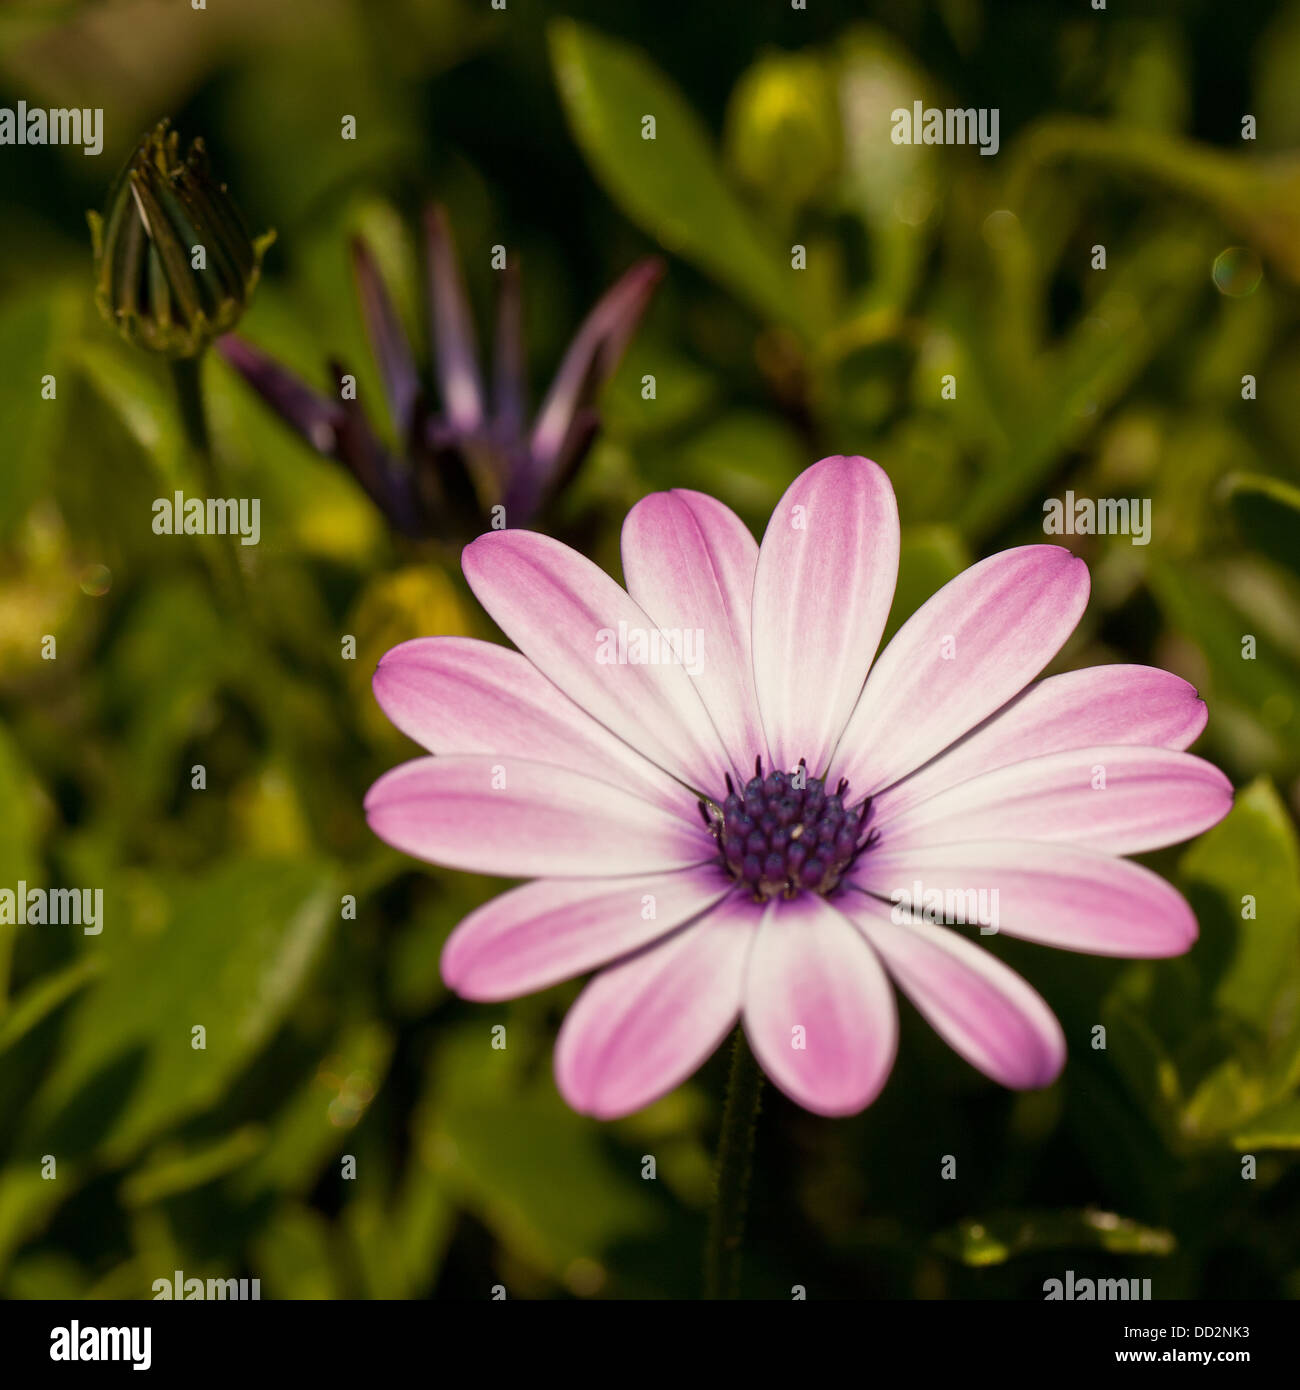 Light purple / lilac / pink flower of Cape Daisy with young buds in background Stock Photo